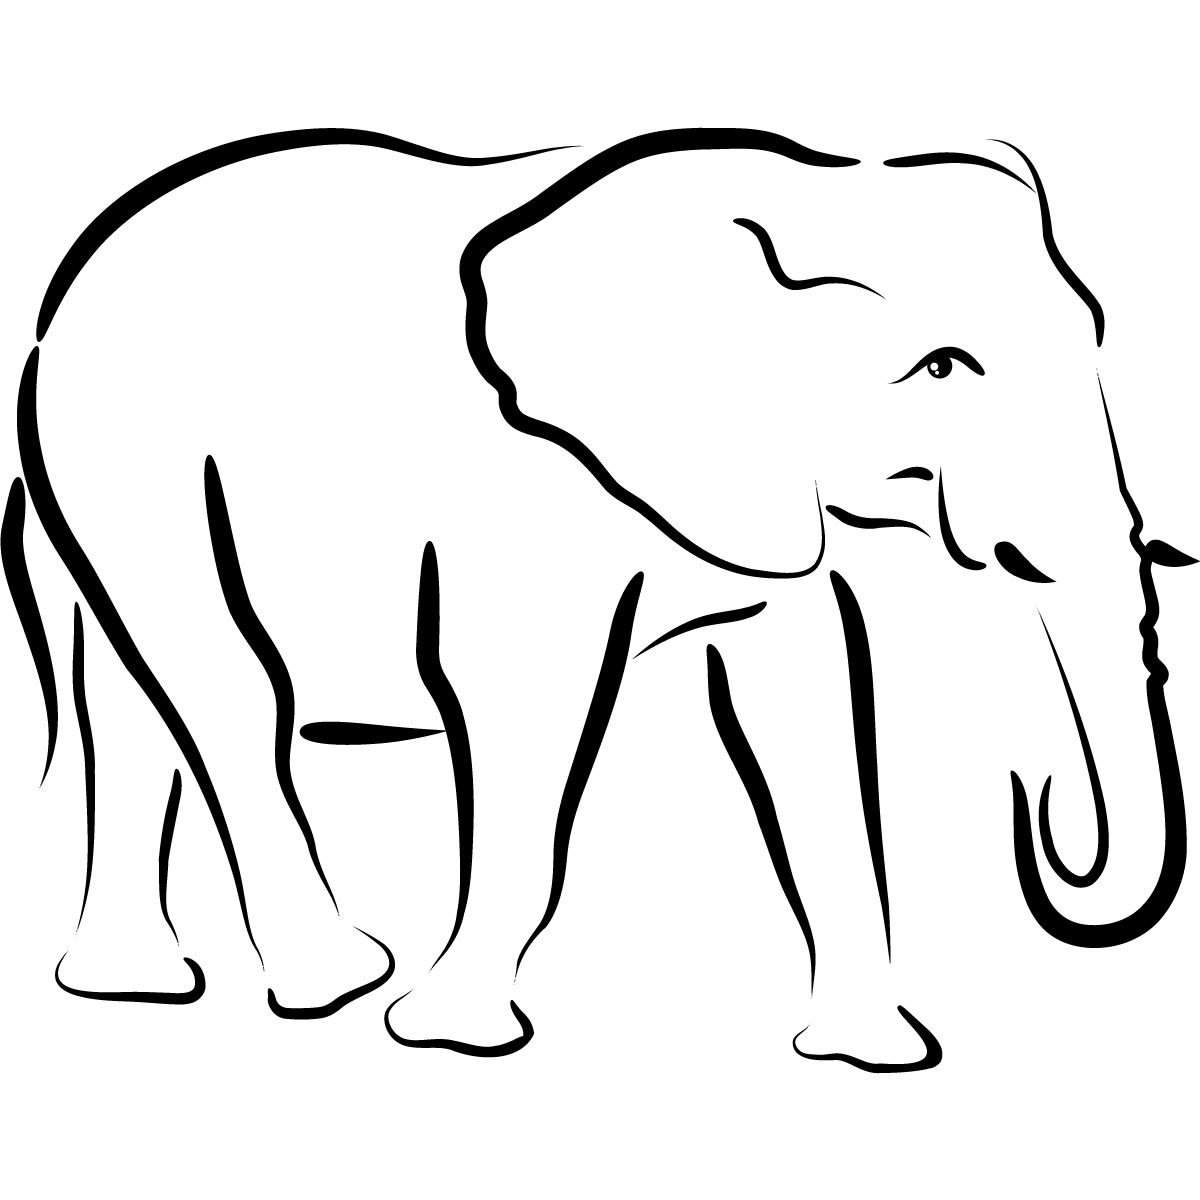 Free Simple Elephant Outline, Download Free Clip Art, Free Throughout Blank Elephant Template